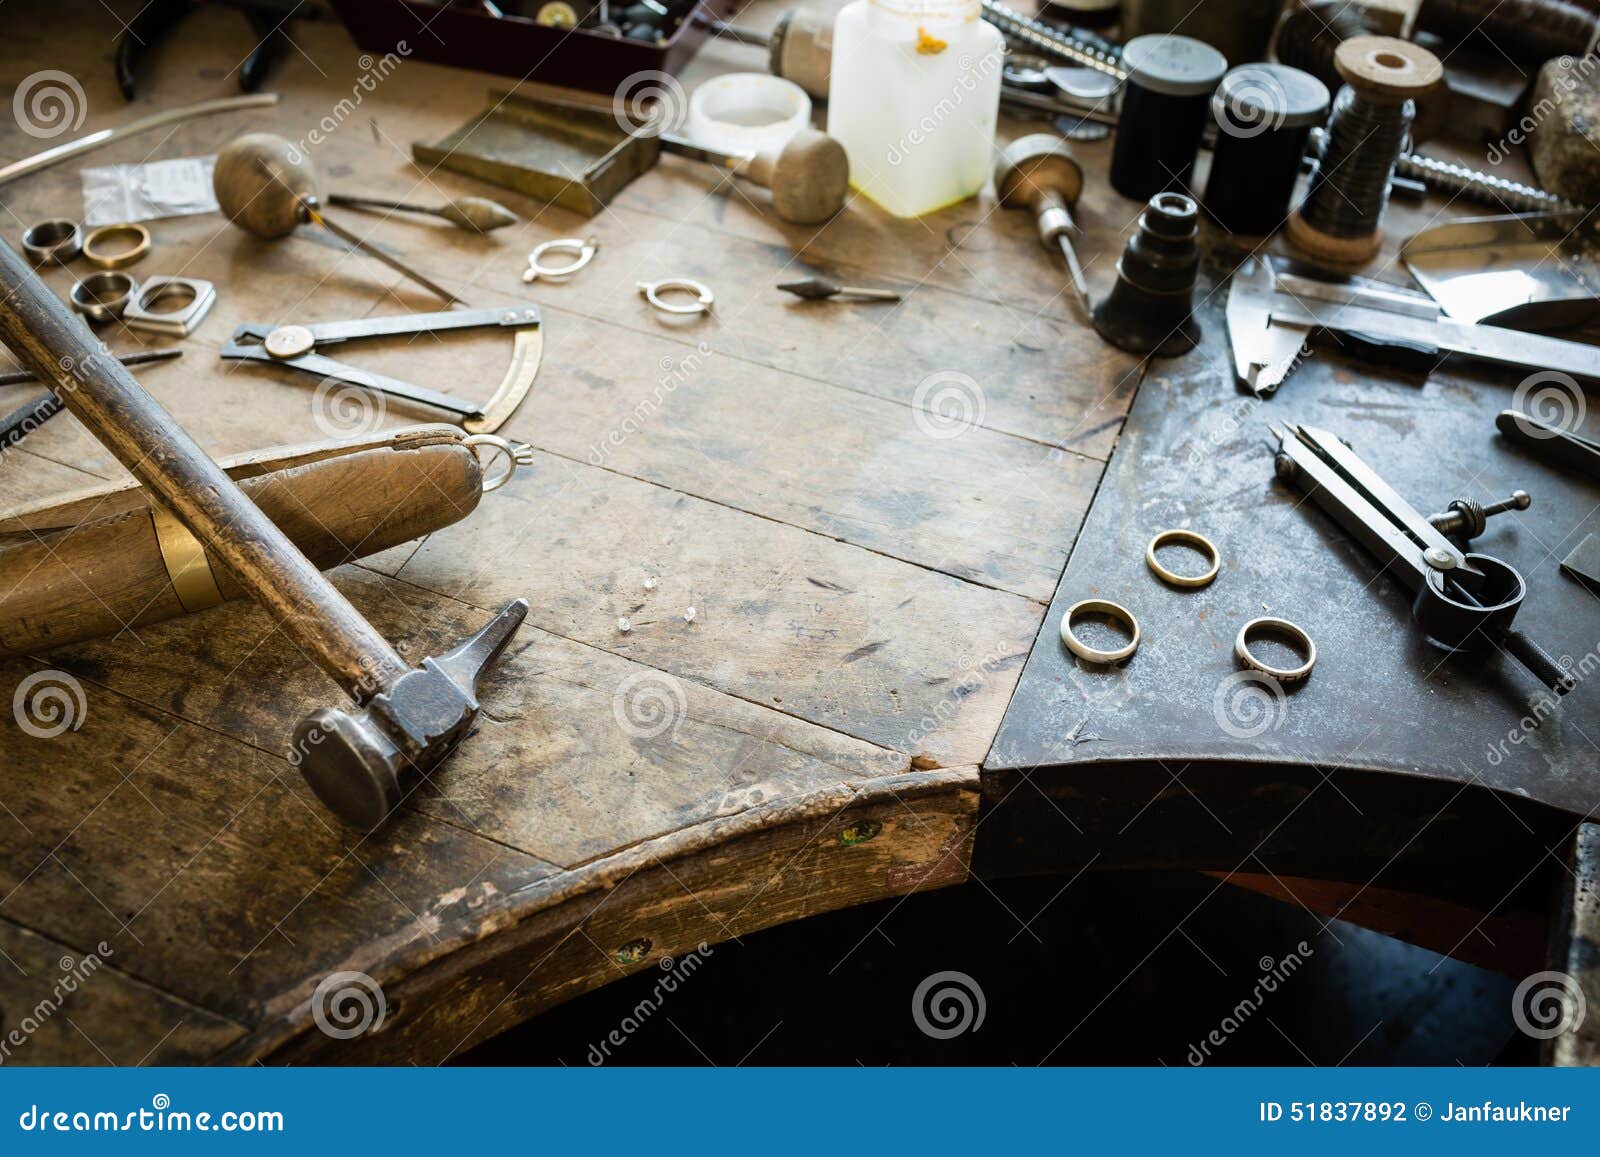 working desk for craft jewelery making